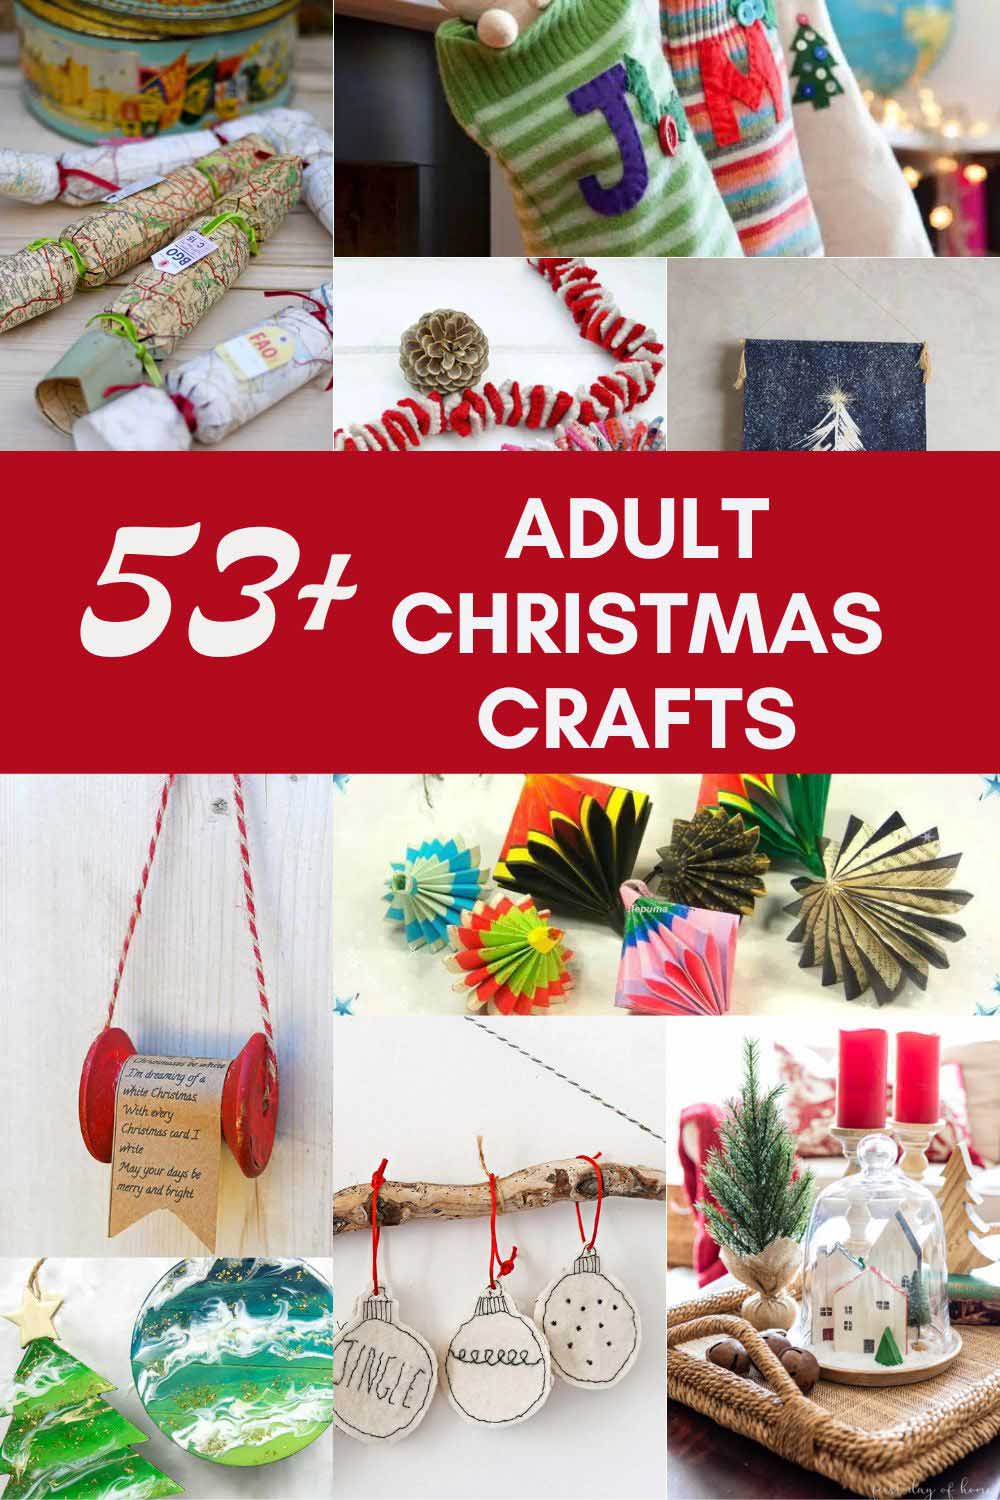 20 Eazy Christmas Crafts for Adults - Craftsy Hacks